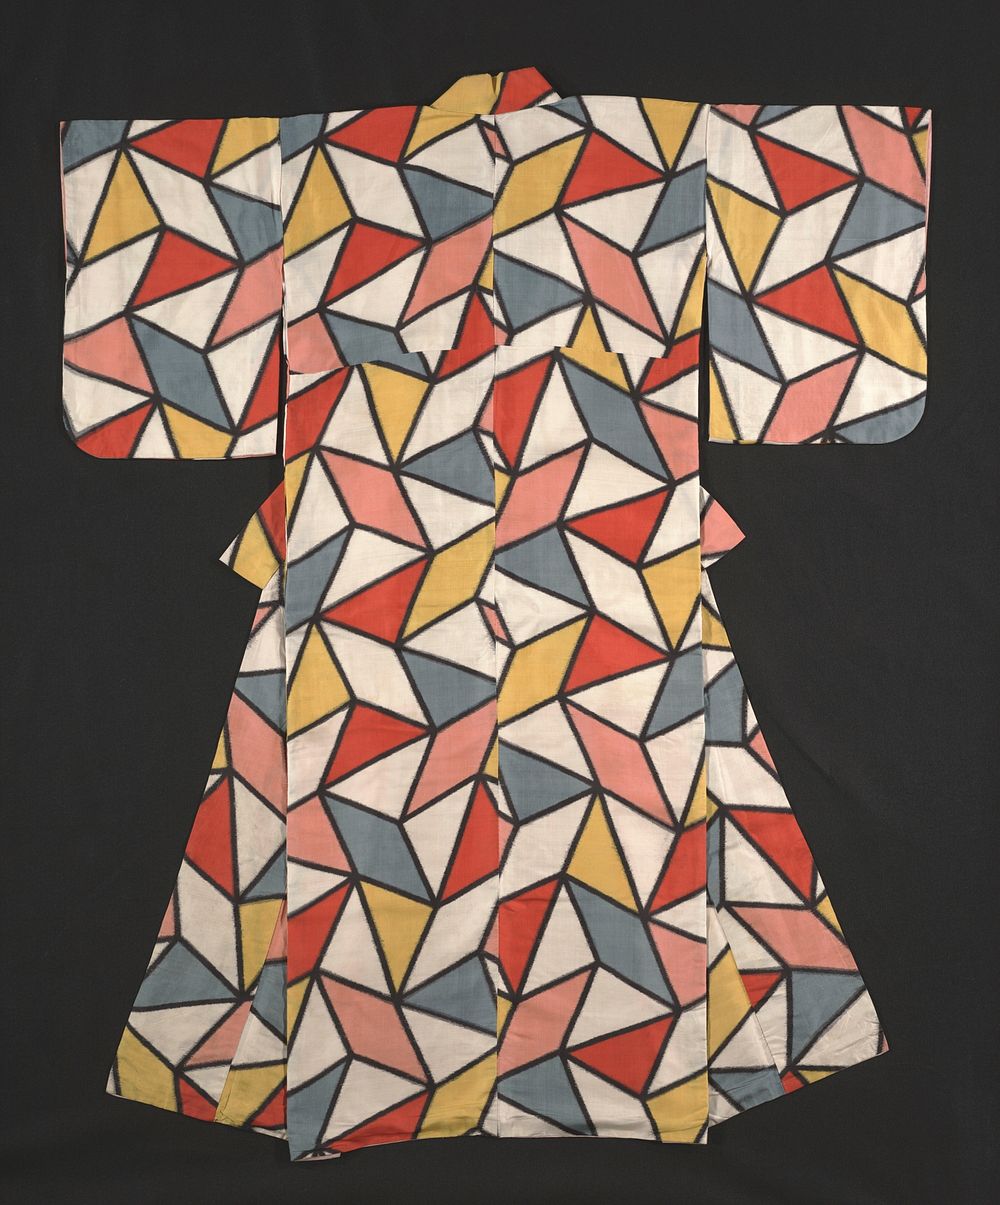 Meisen kimono, first half 20th century clothing in high resolution. Original from the Minneapolis Institute of Art.…